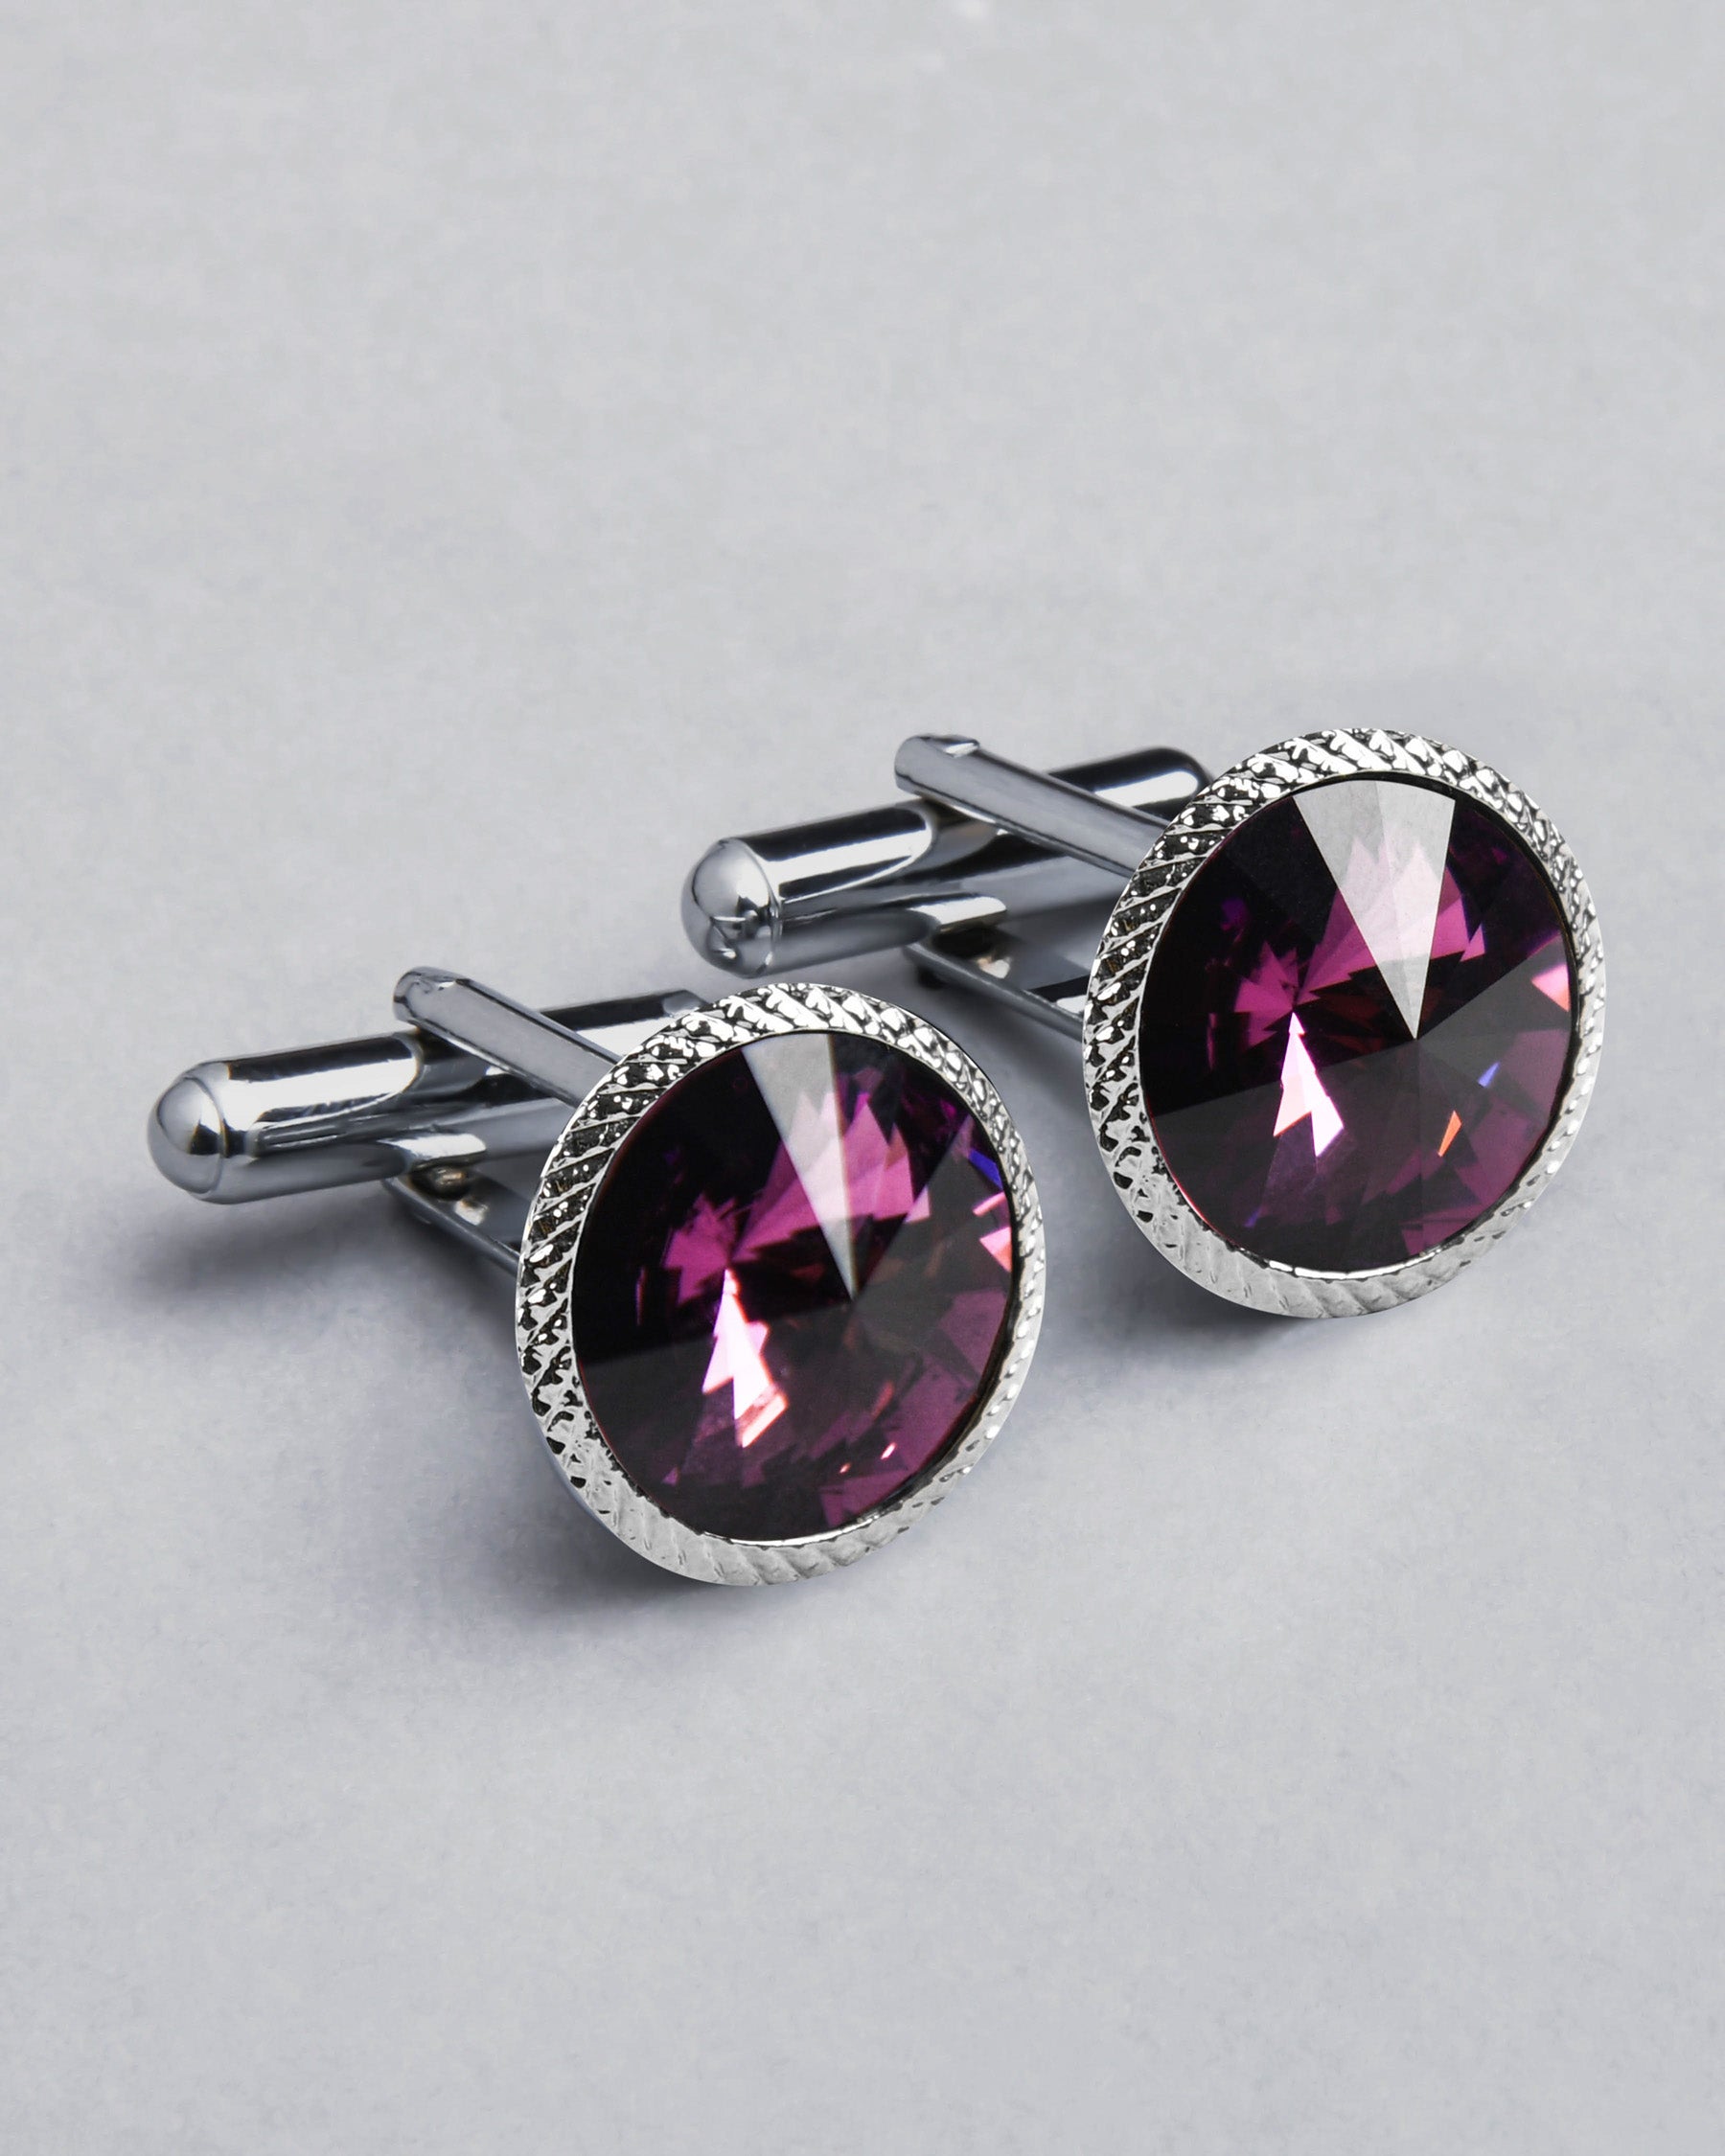 Silver with Border Engraved Purple Diamond Shaped Stone Cufflinks CL40